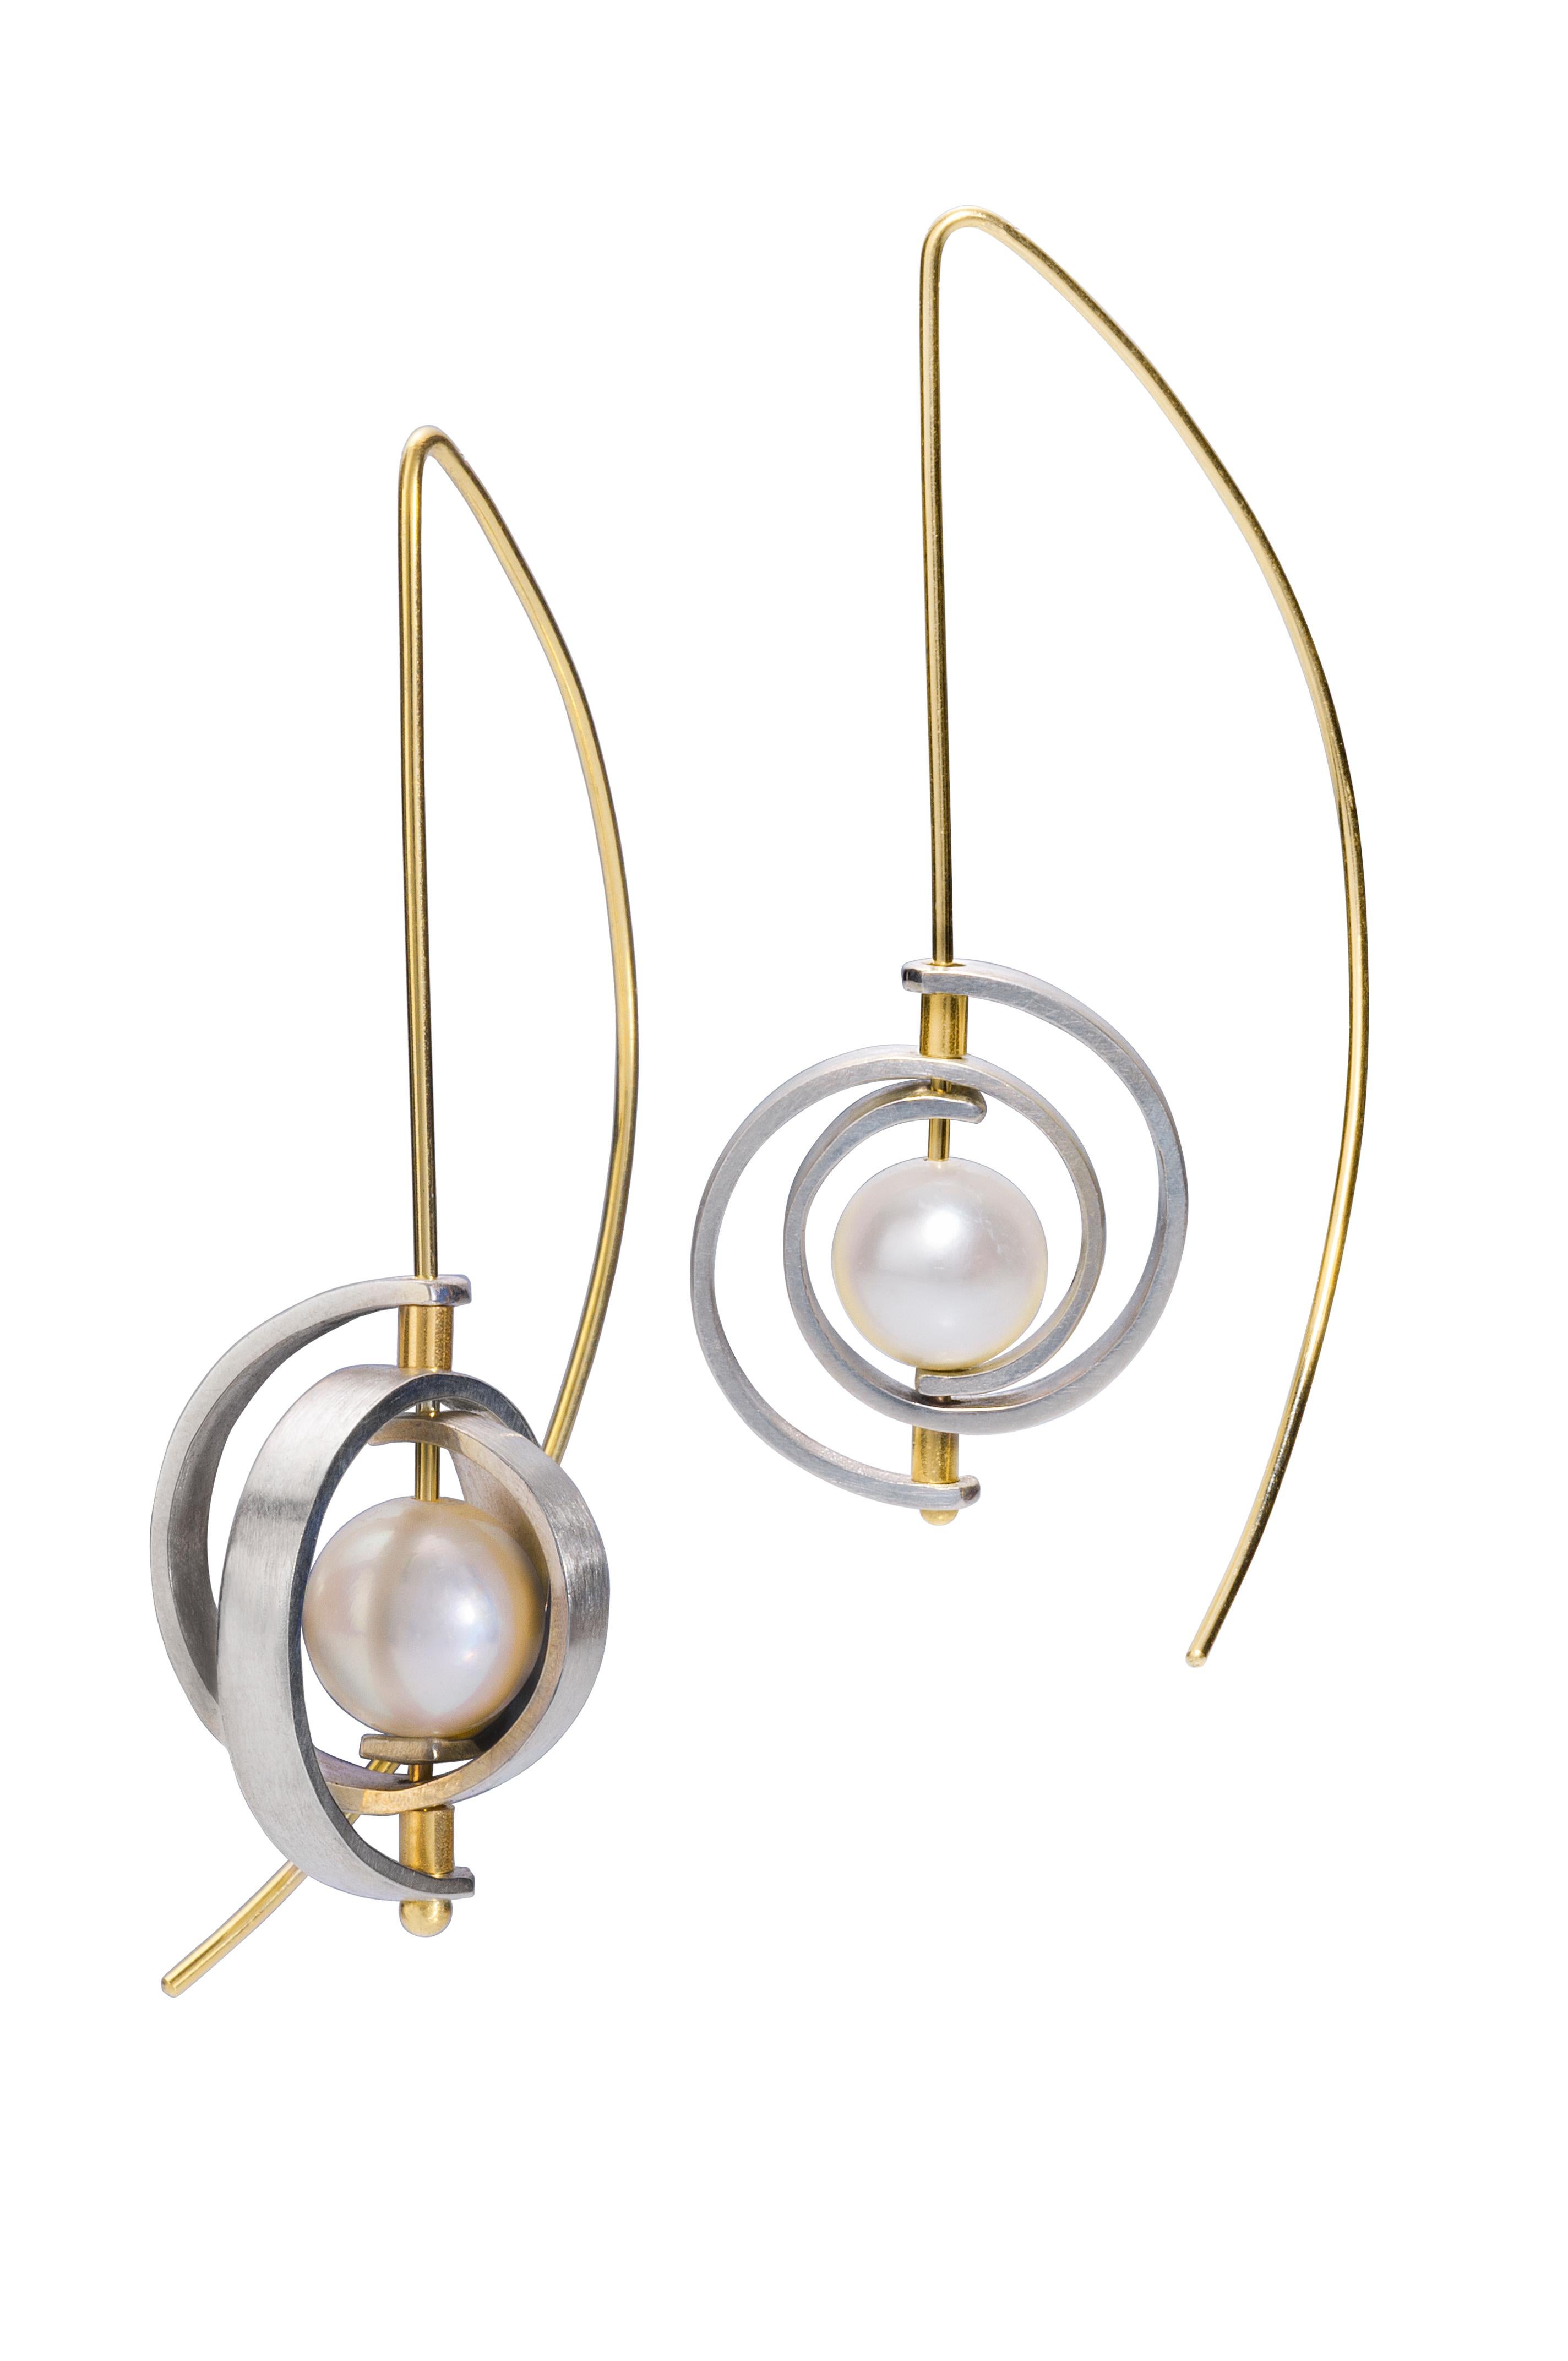 These pearl earrings are a modern classic. They are Medium Spiral Dangle Earrings from the Orbit collection with sterling silver spirals, a 21 gauge 14karat yellow gold ear wire and a lustrous, 7-8.5mm Akoya pearl. The earrings hang 2